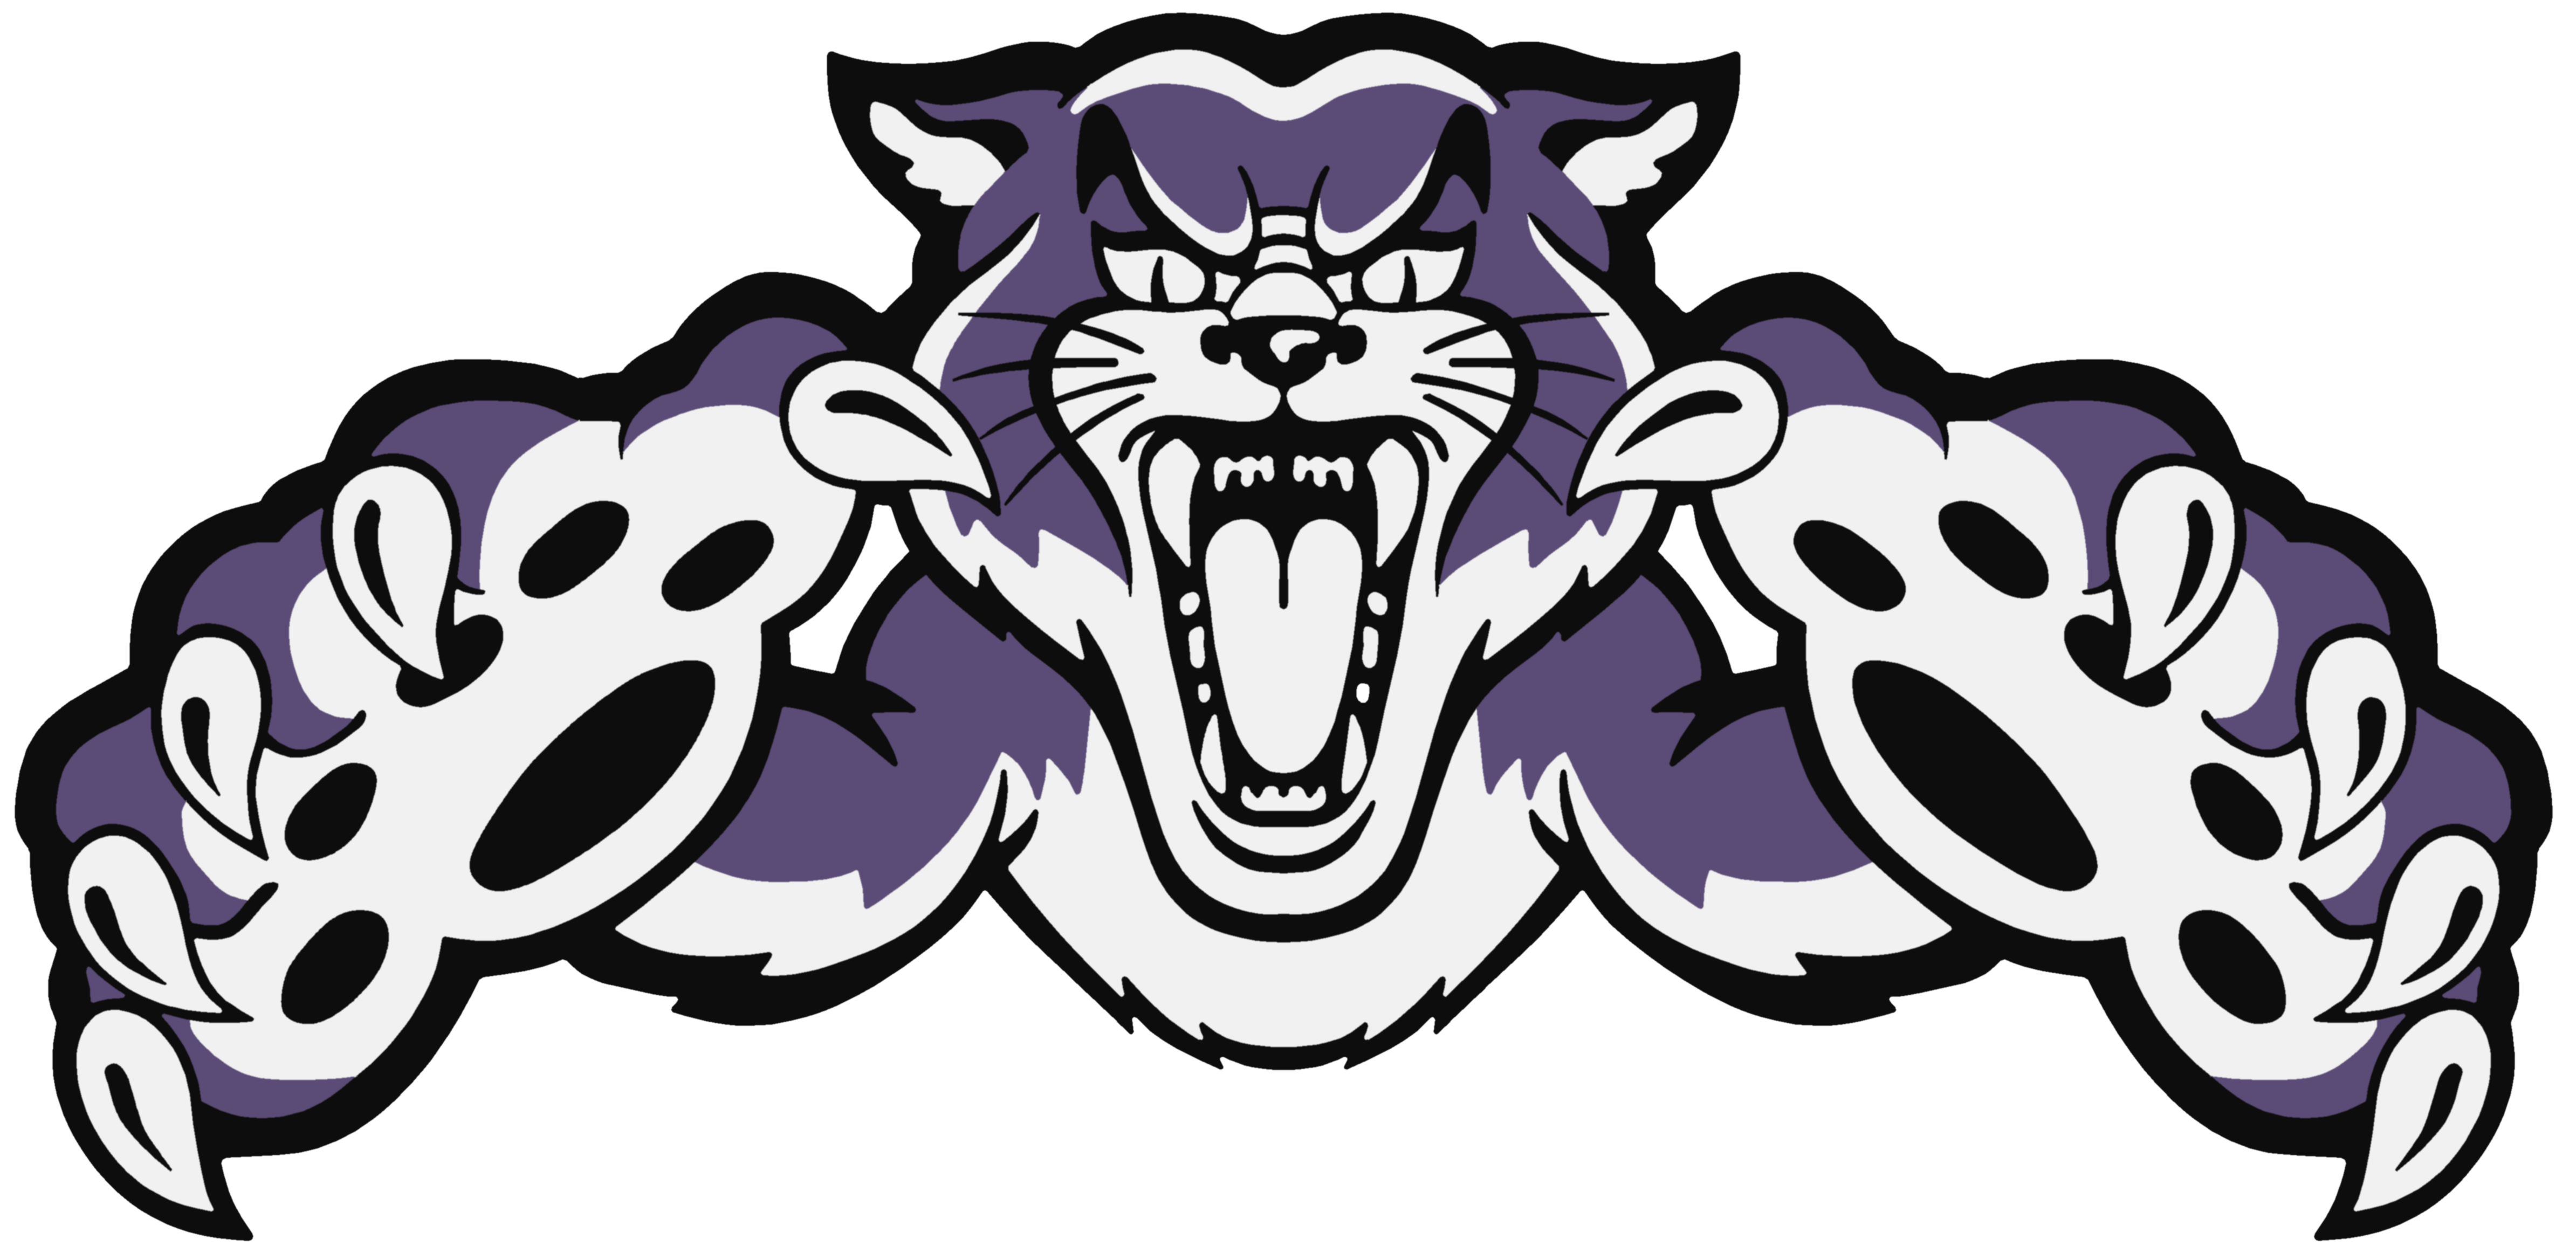 Cool Wildcat Logo - 14 cliparts for free. Download Wildcat clipart lion and use in ...